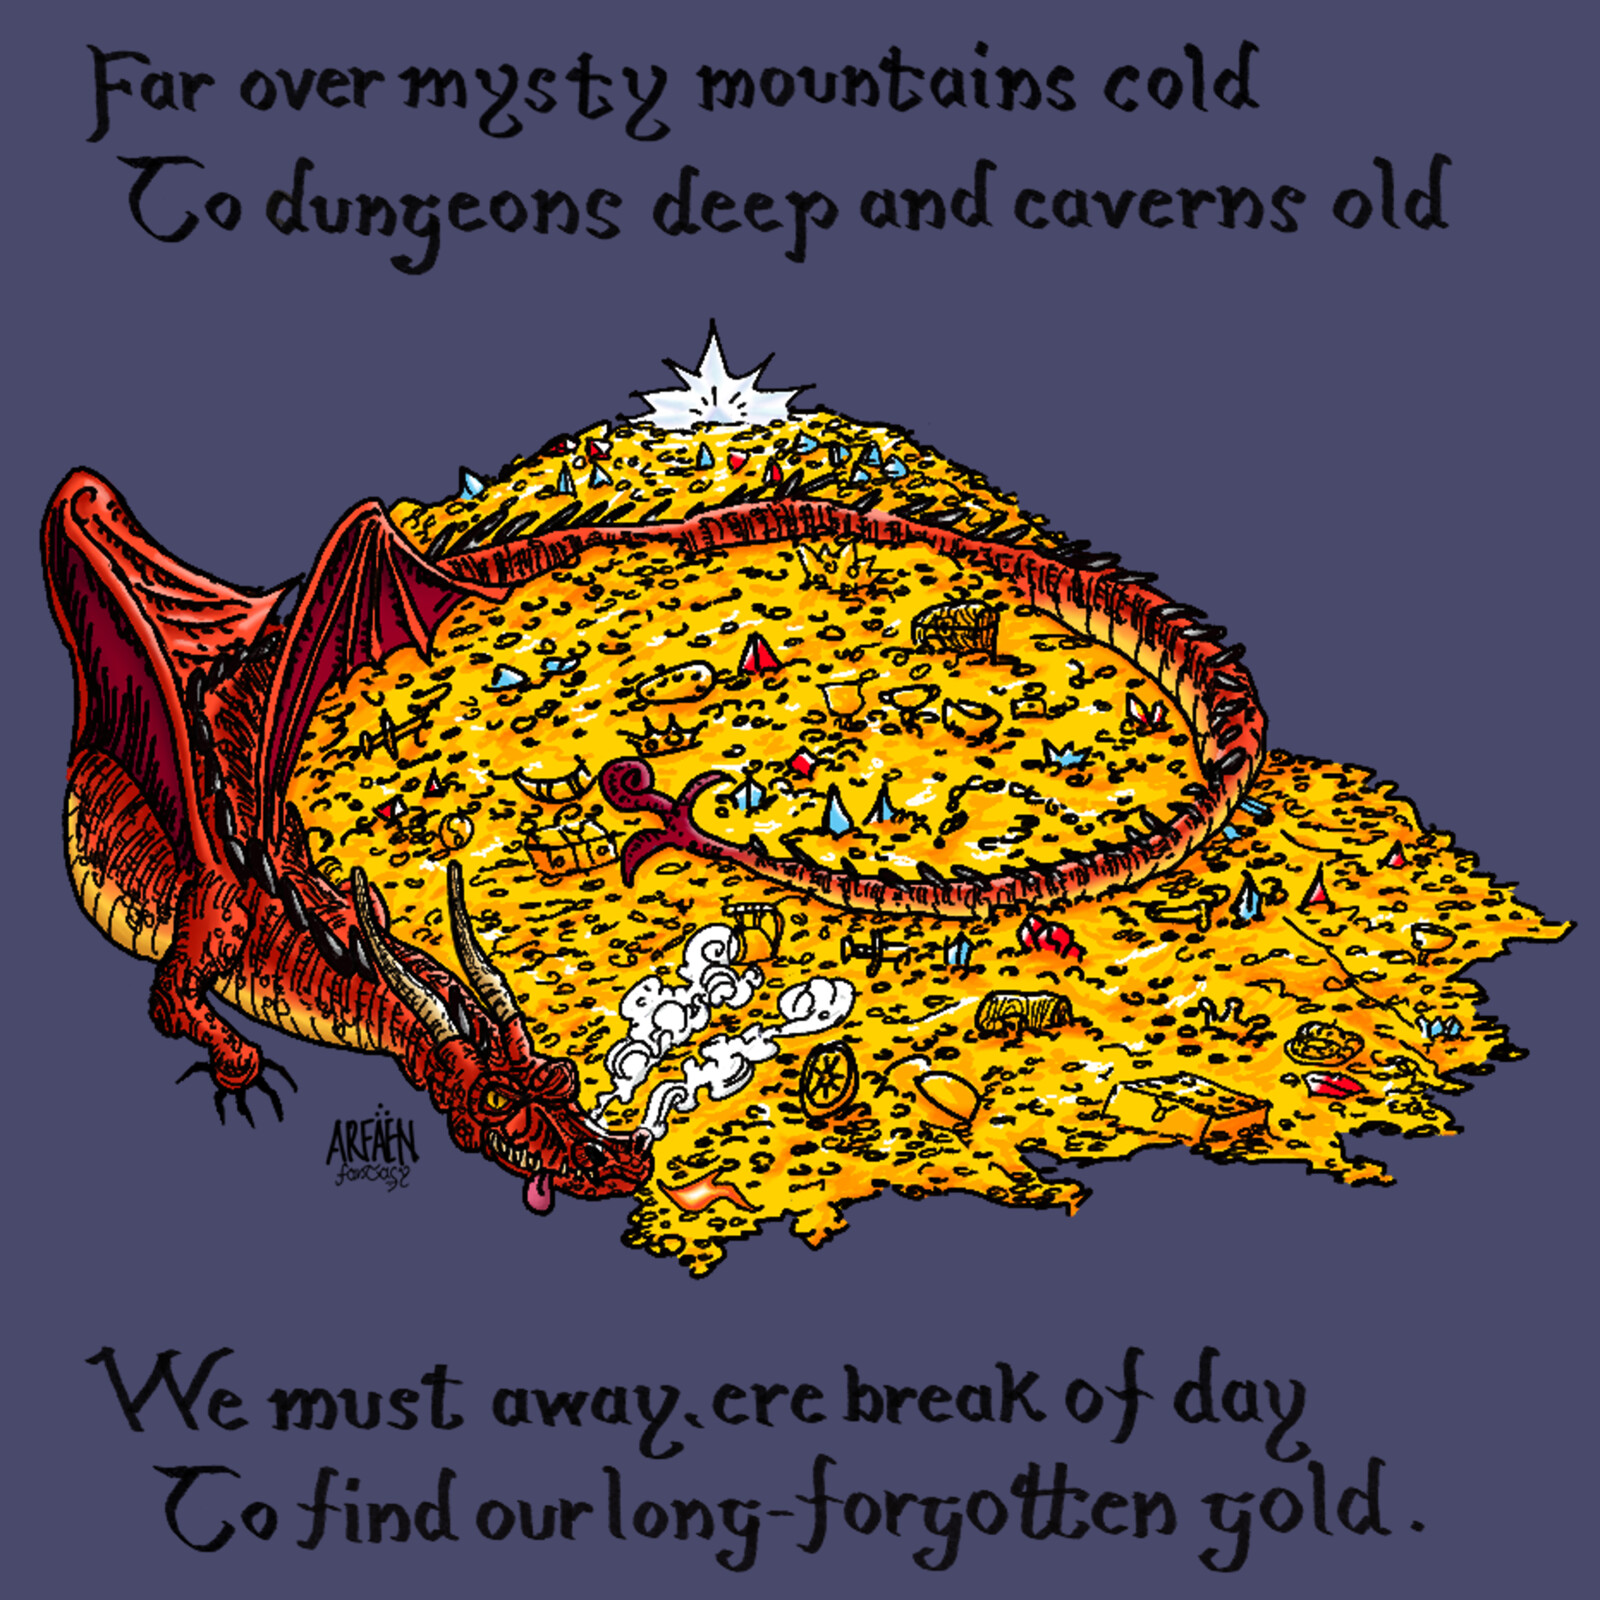 Smaug and The Song of The Lonely Mountain